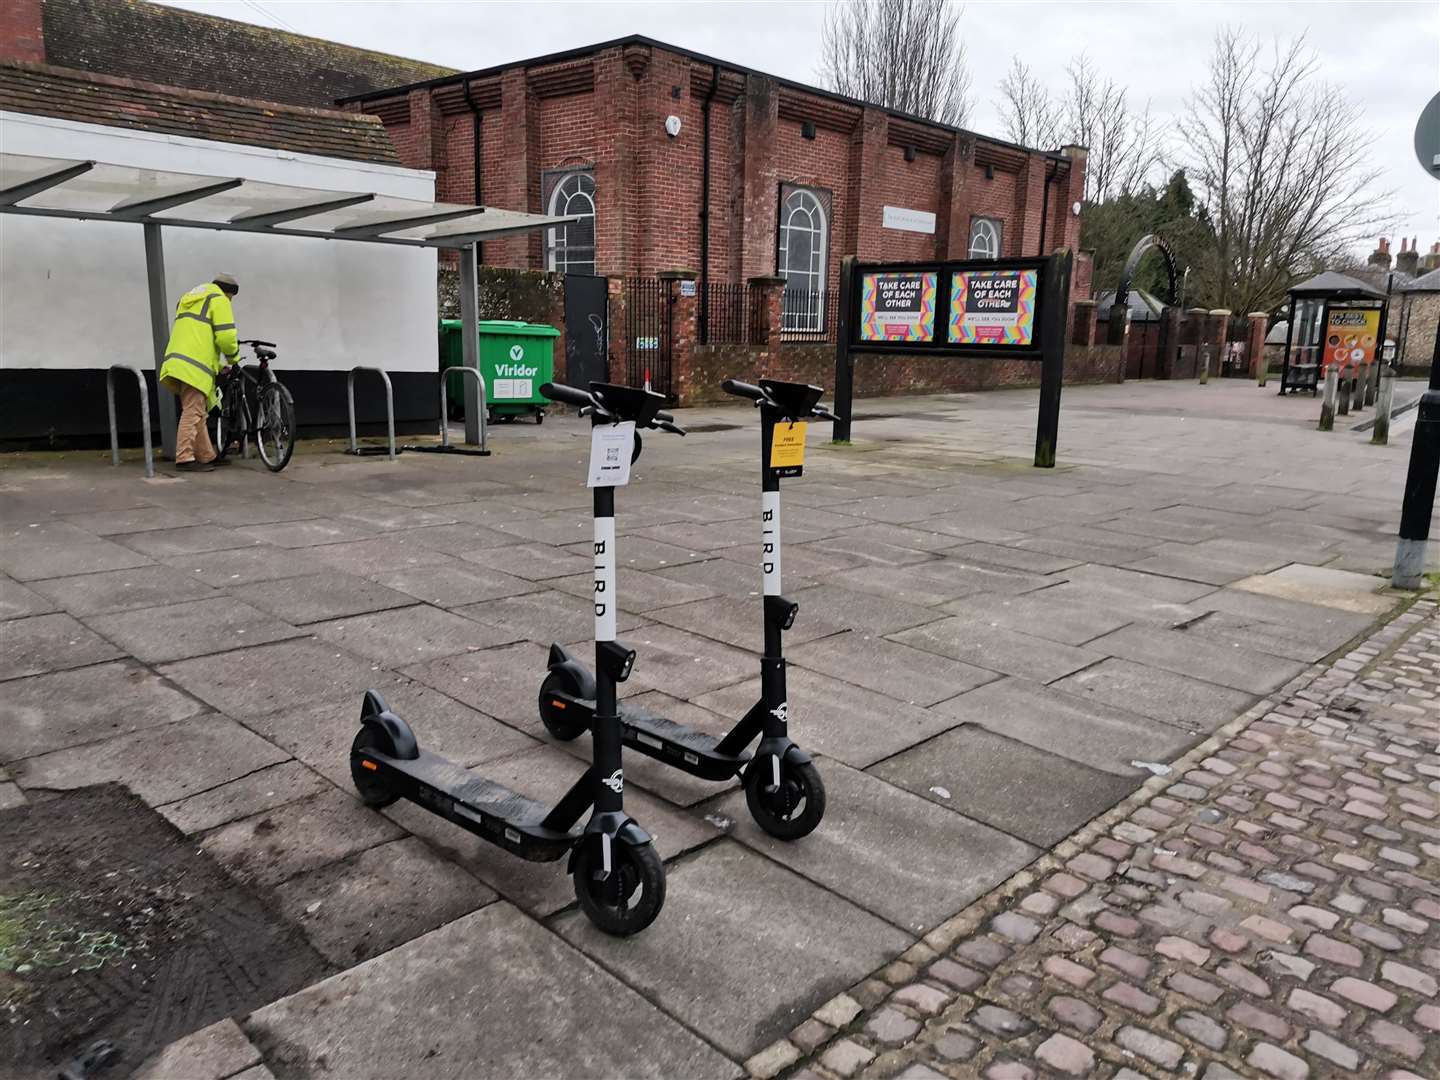 The electric scooter service is being extended